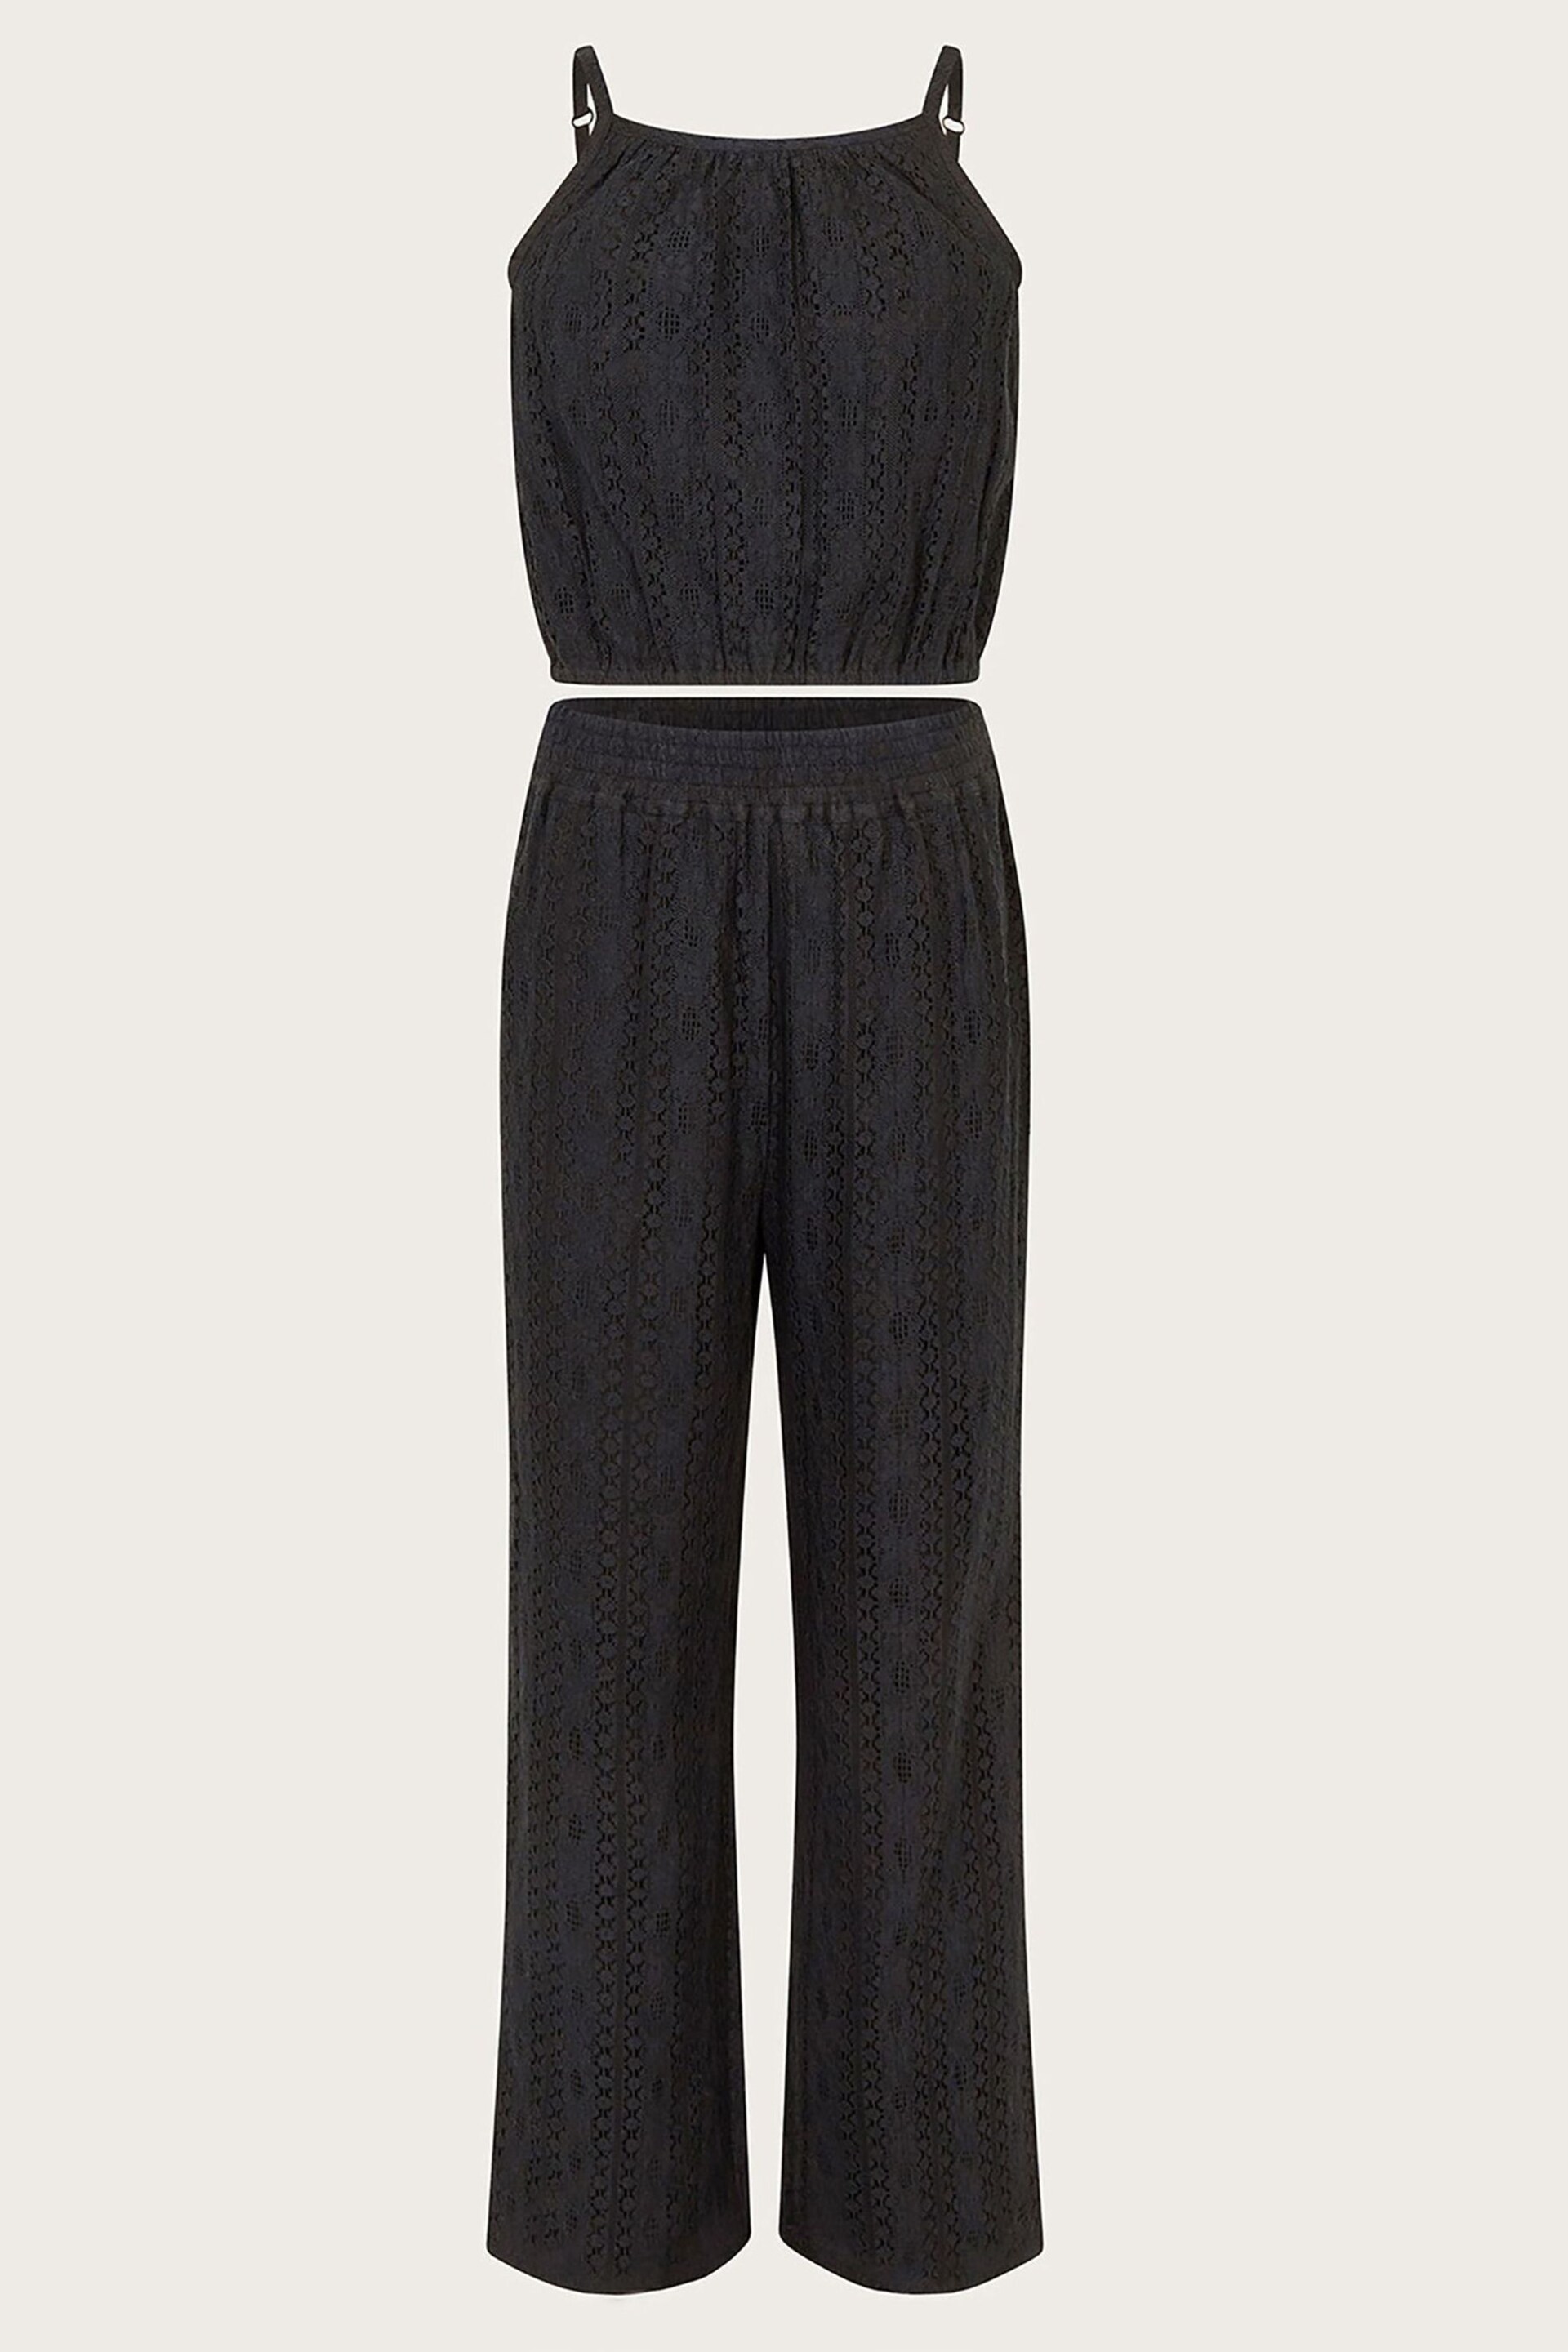 Monsoon Black Lace Top And Trousers Set - Image 1 of 3